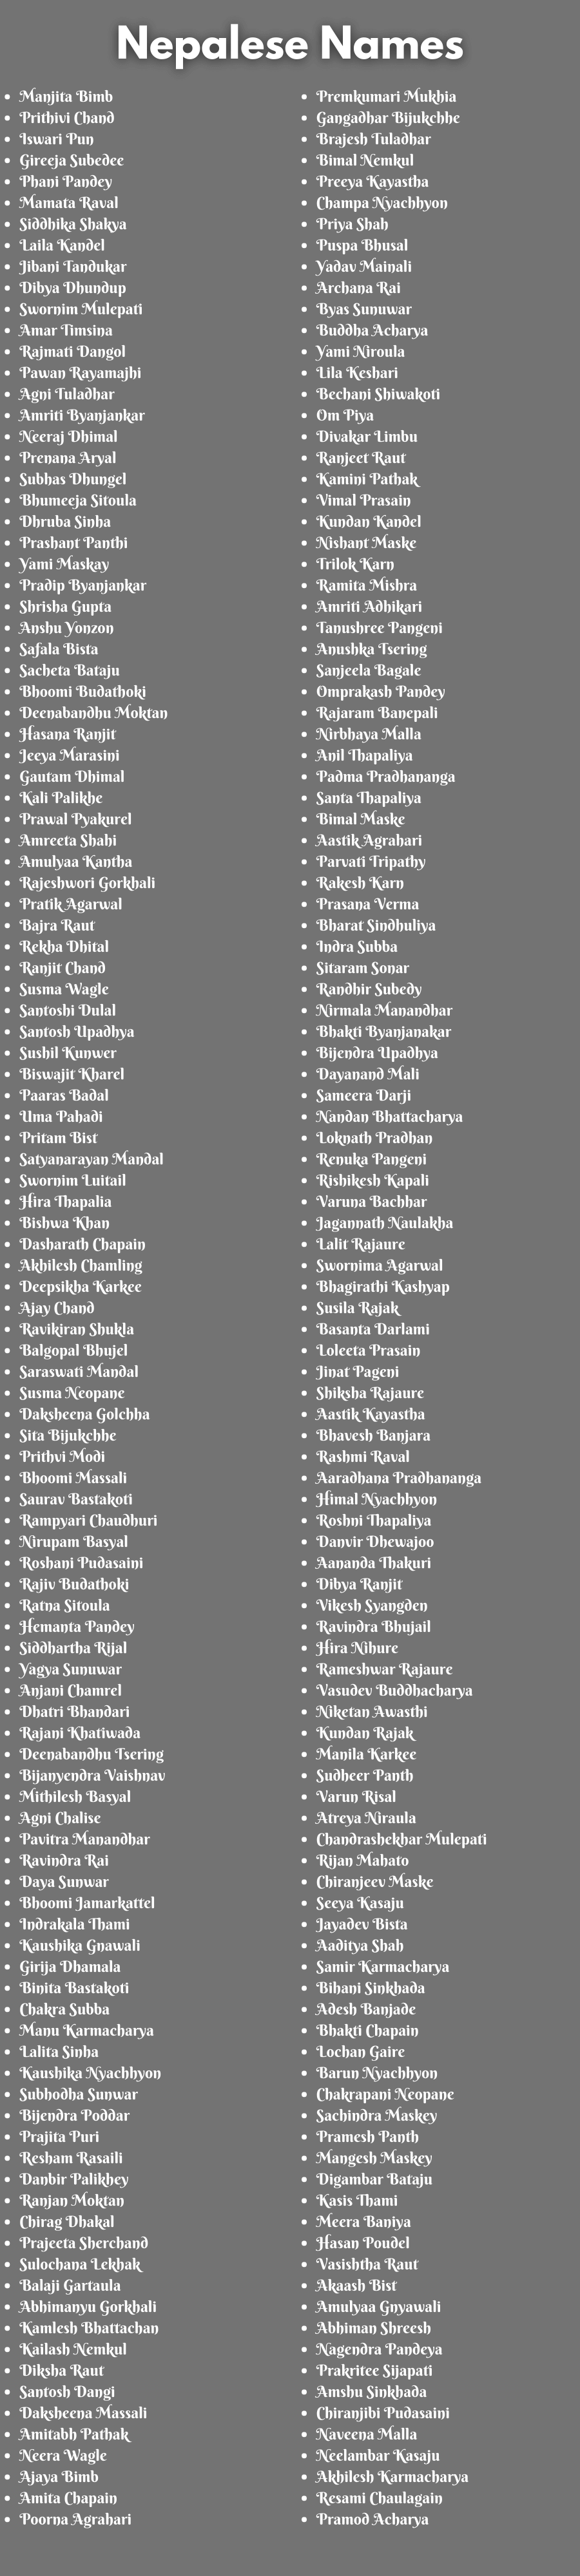 Nepalese Names